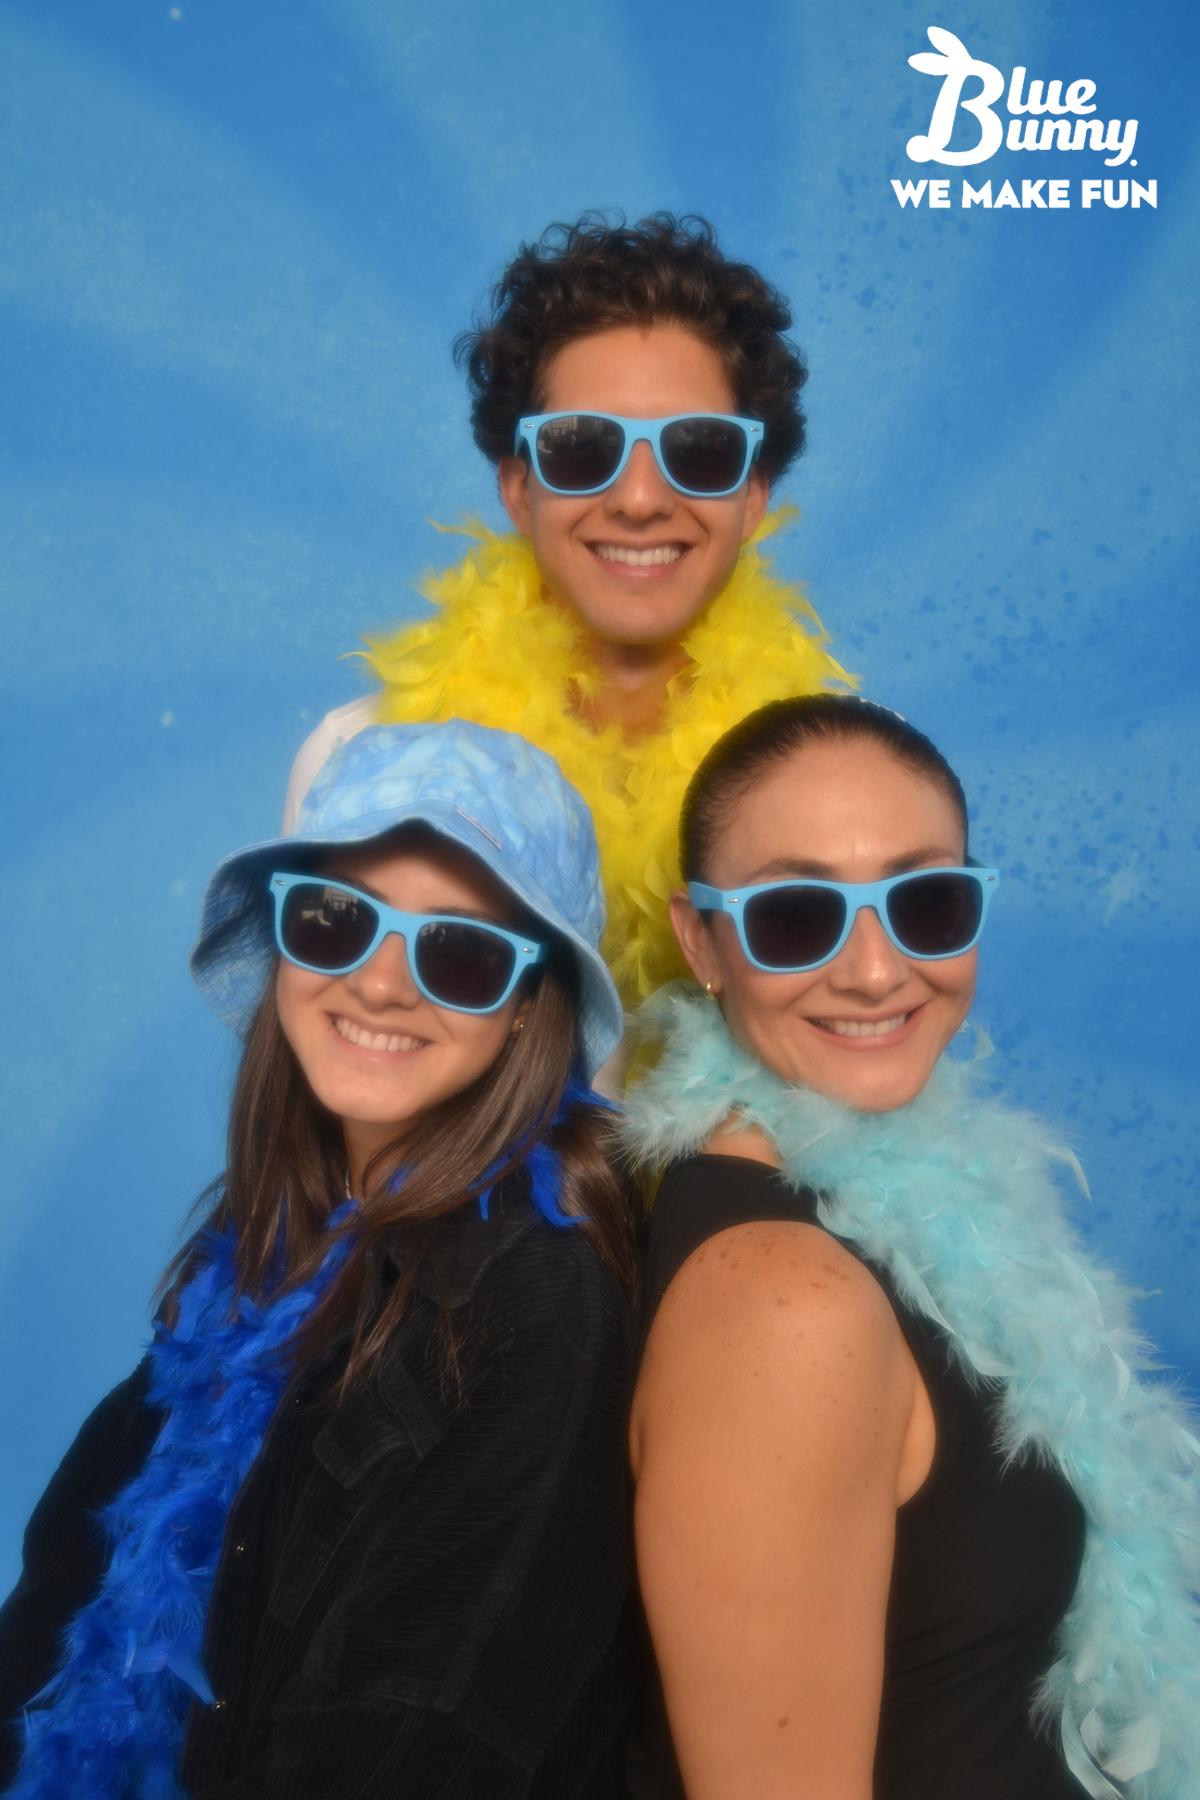 Three people with sunglasses and boas